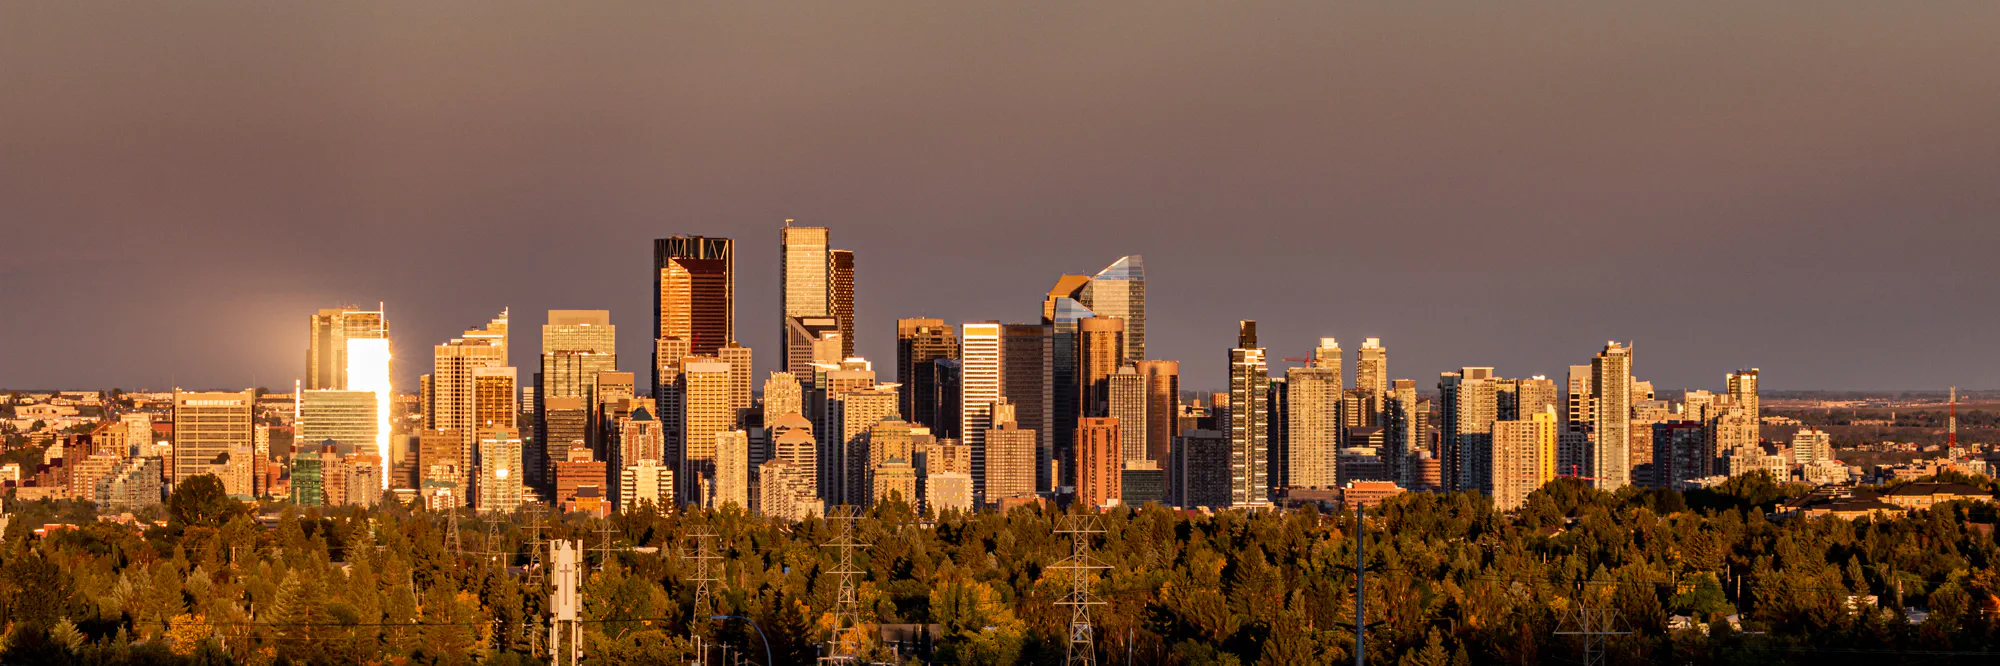 Sunset on Downtown Calgary